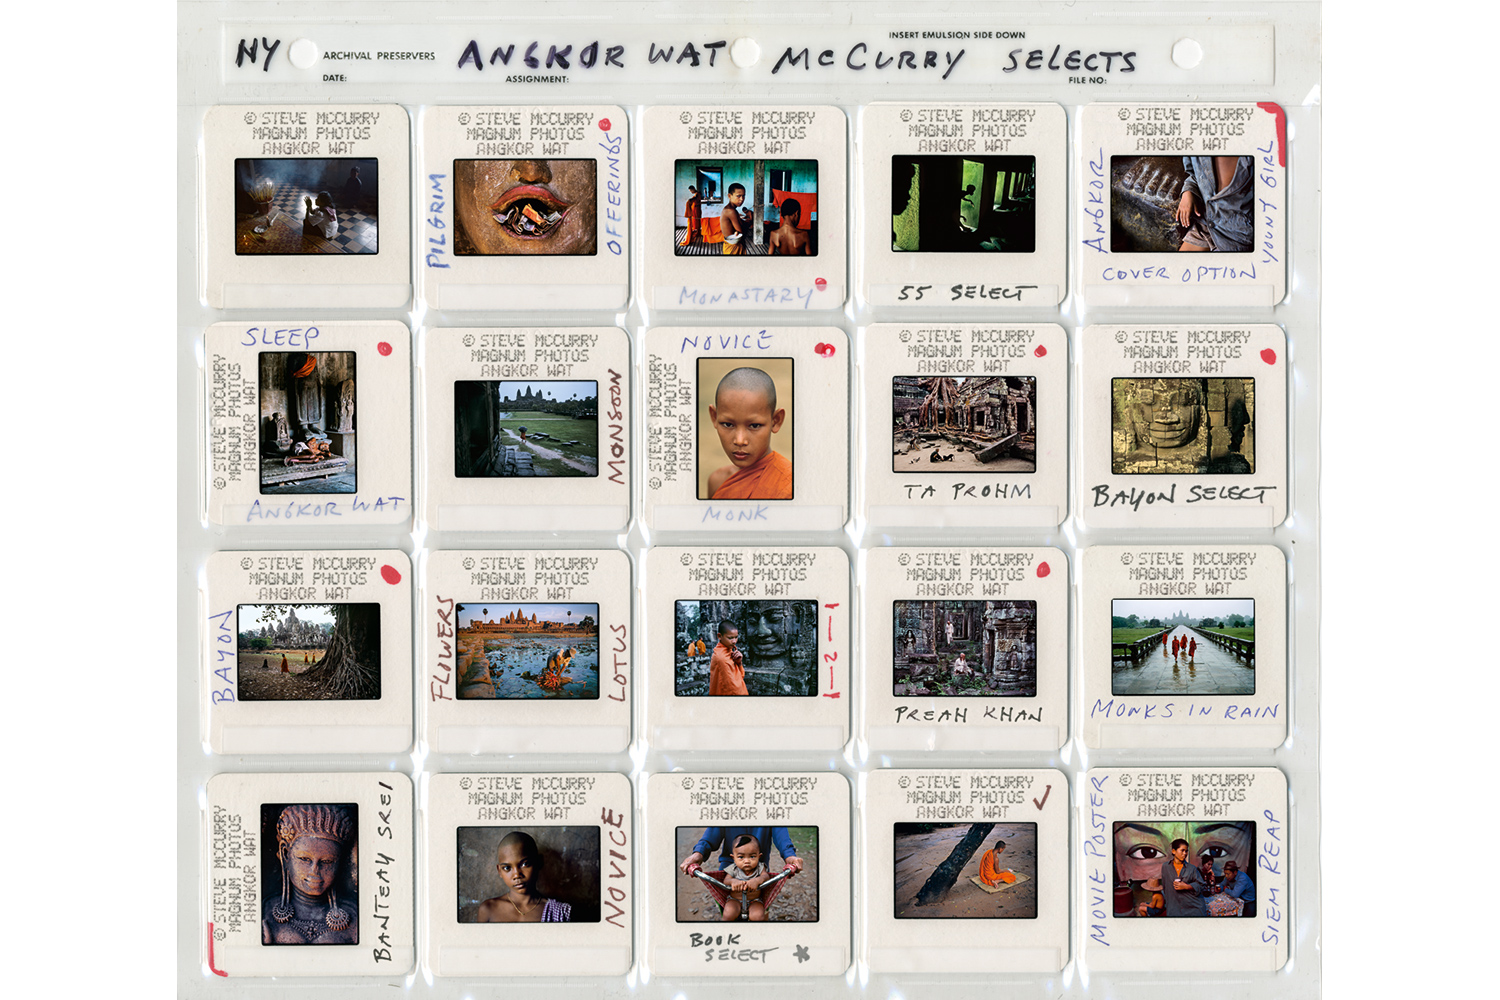 McCurry’s 35mm slides from Angkor, Cambodia